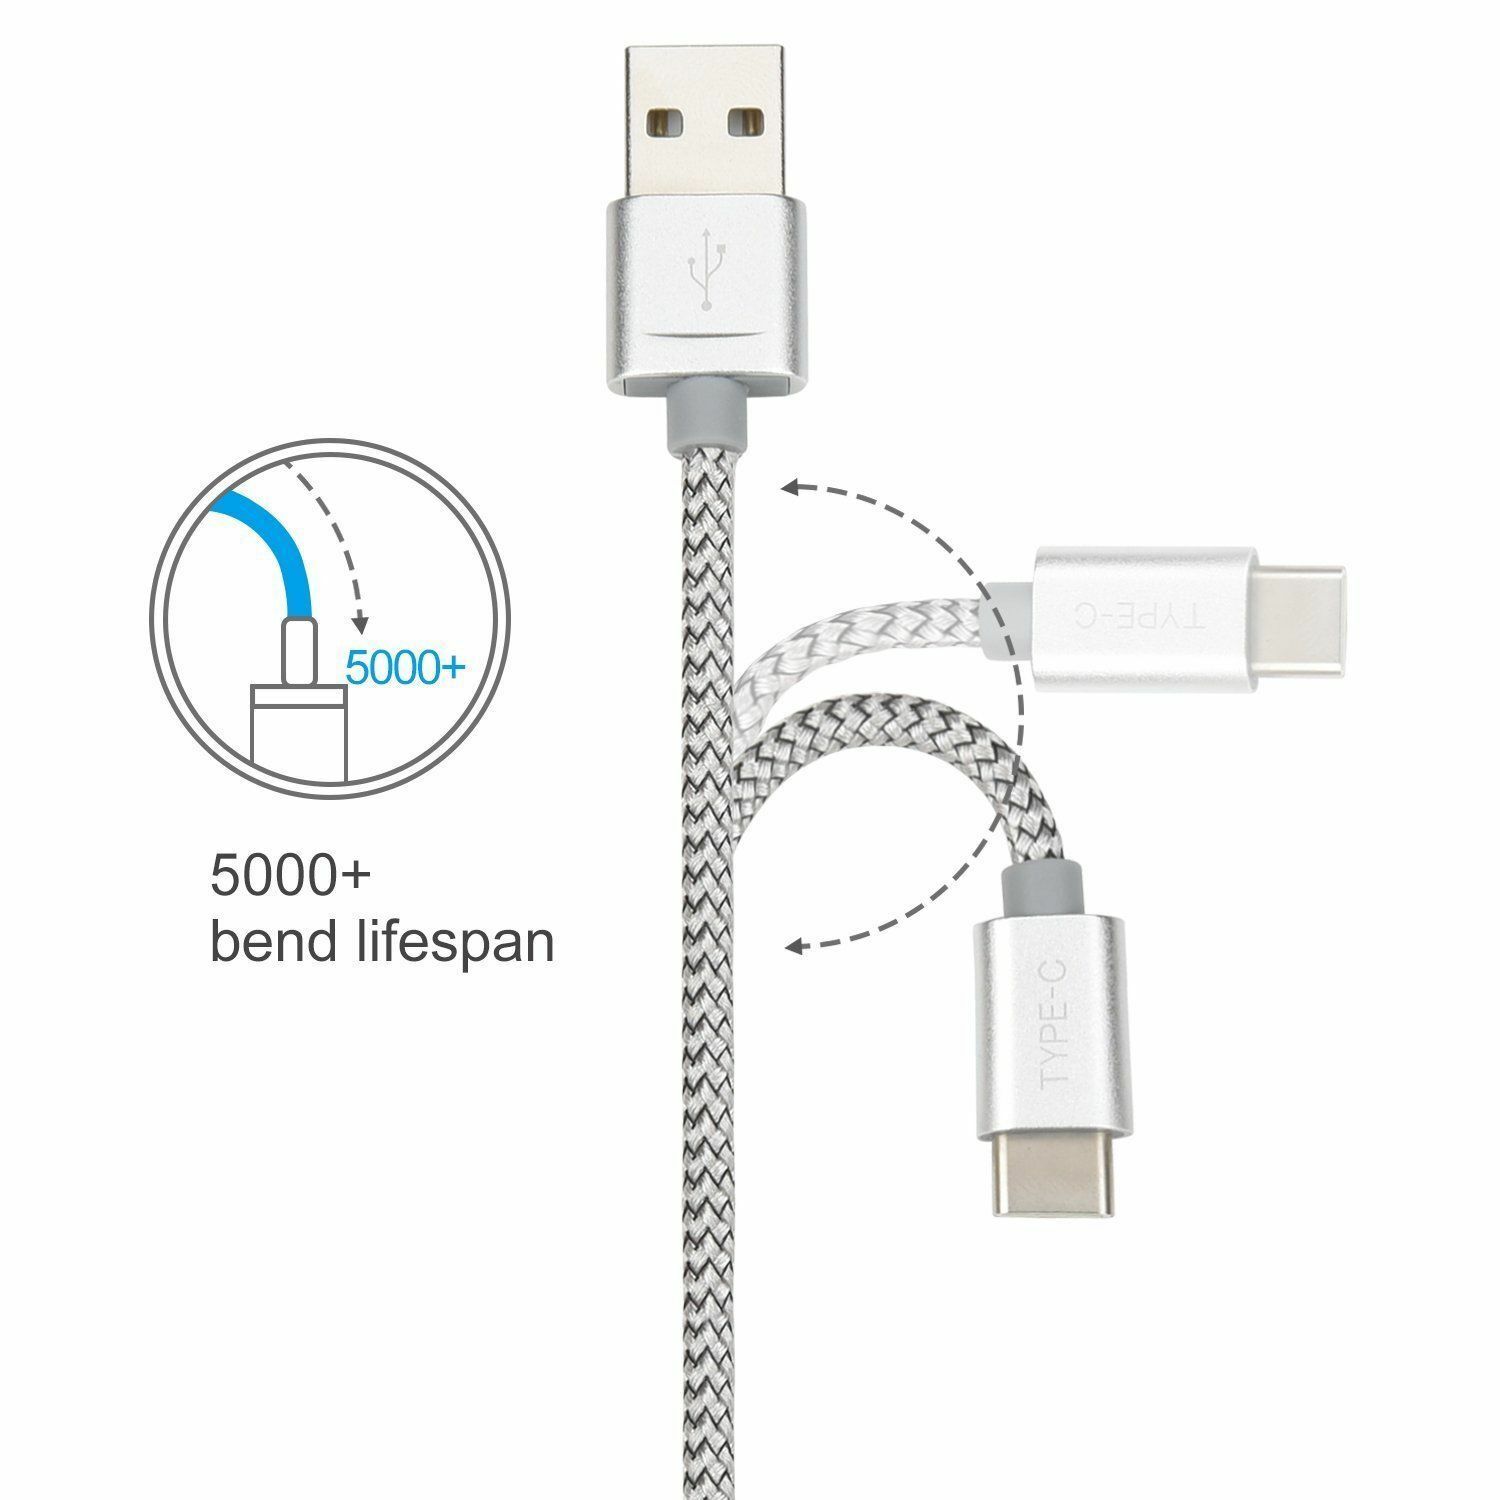 1m-USB-Type-C-Sync-Charger-Charging-Cable-blue-for-Android-mobile-phonele-123379907876-2.jpg